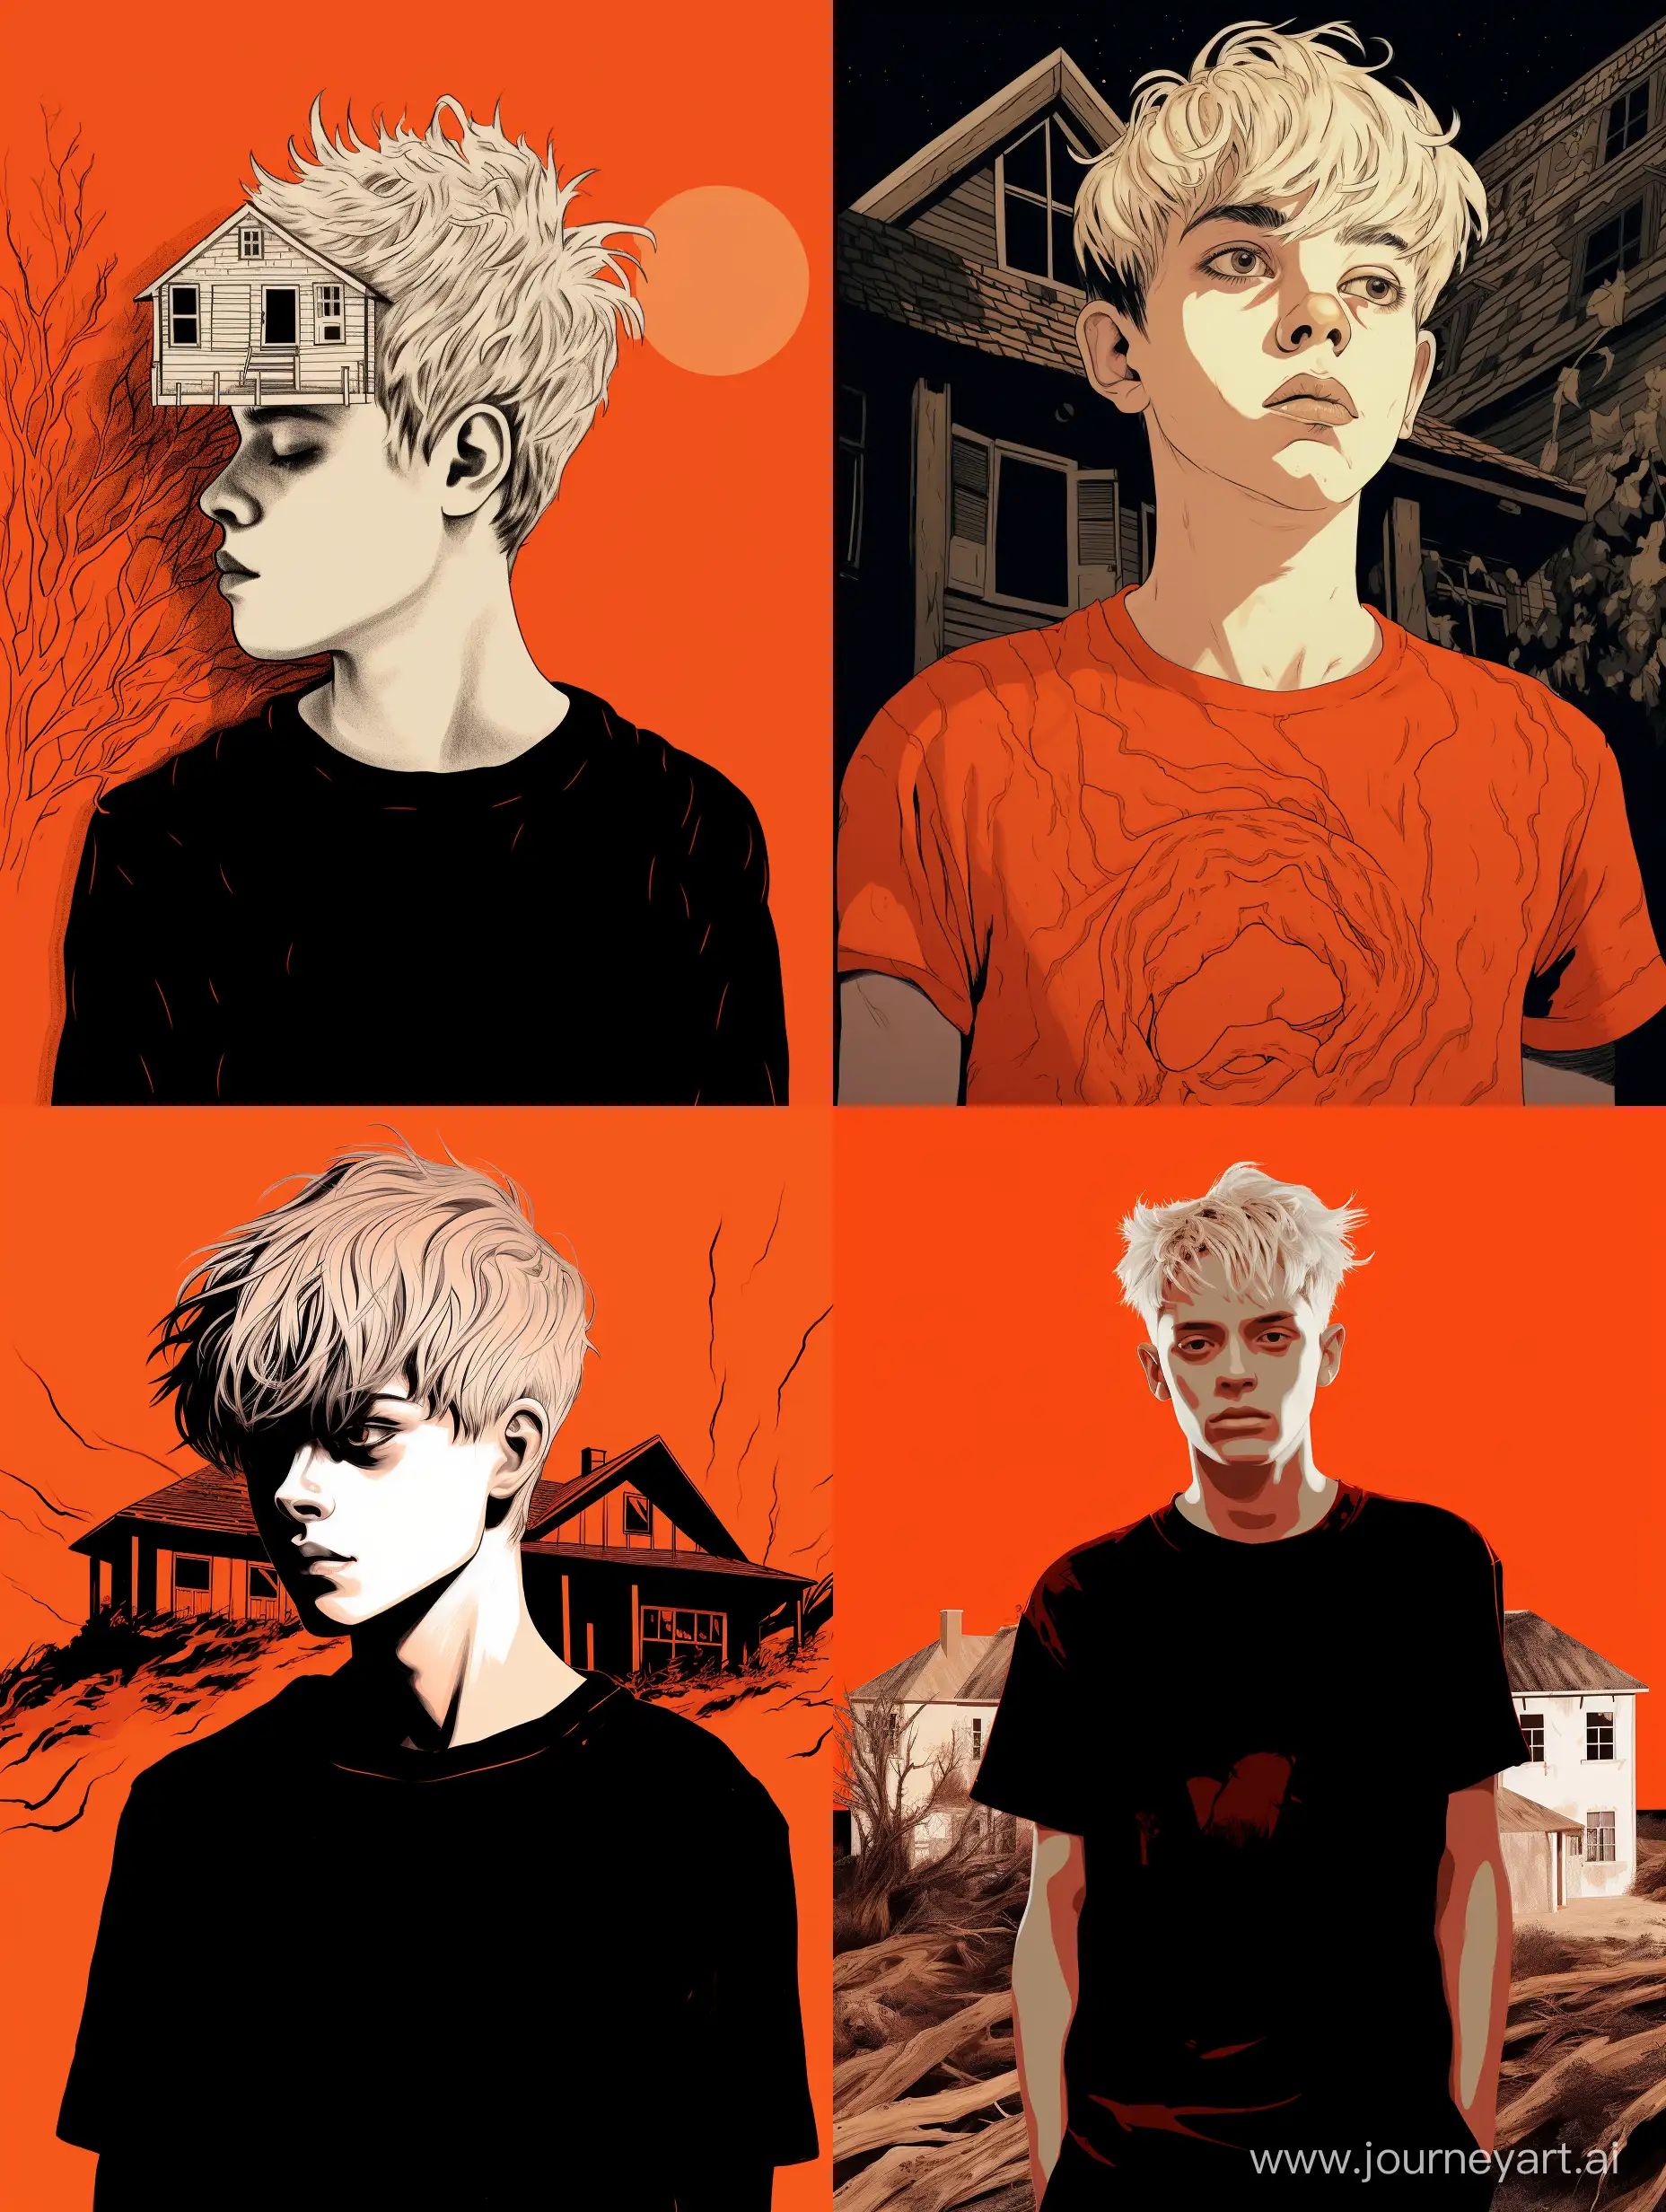 White haired round headed teen with orange shirt. House with black roots digging into his head. Horror, black and red.